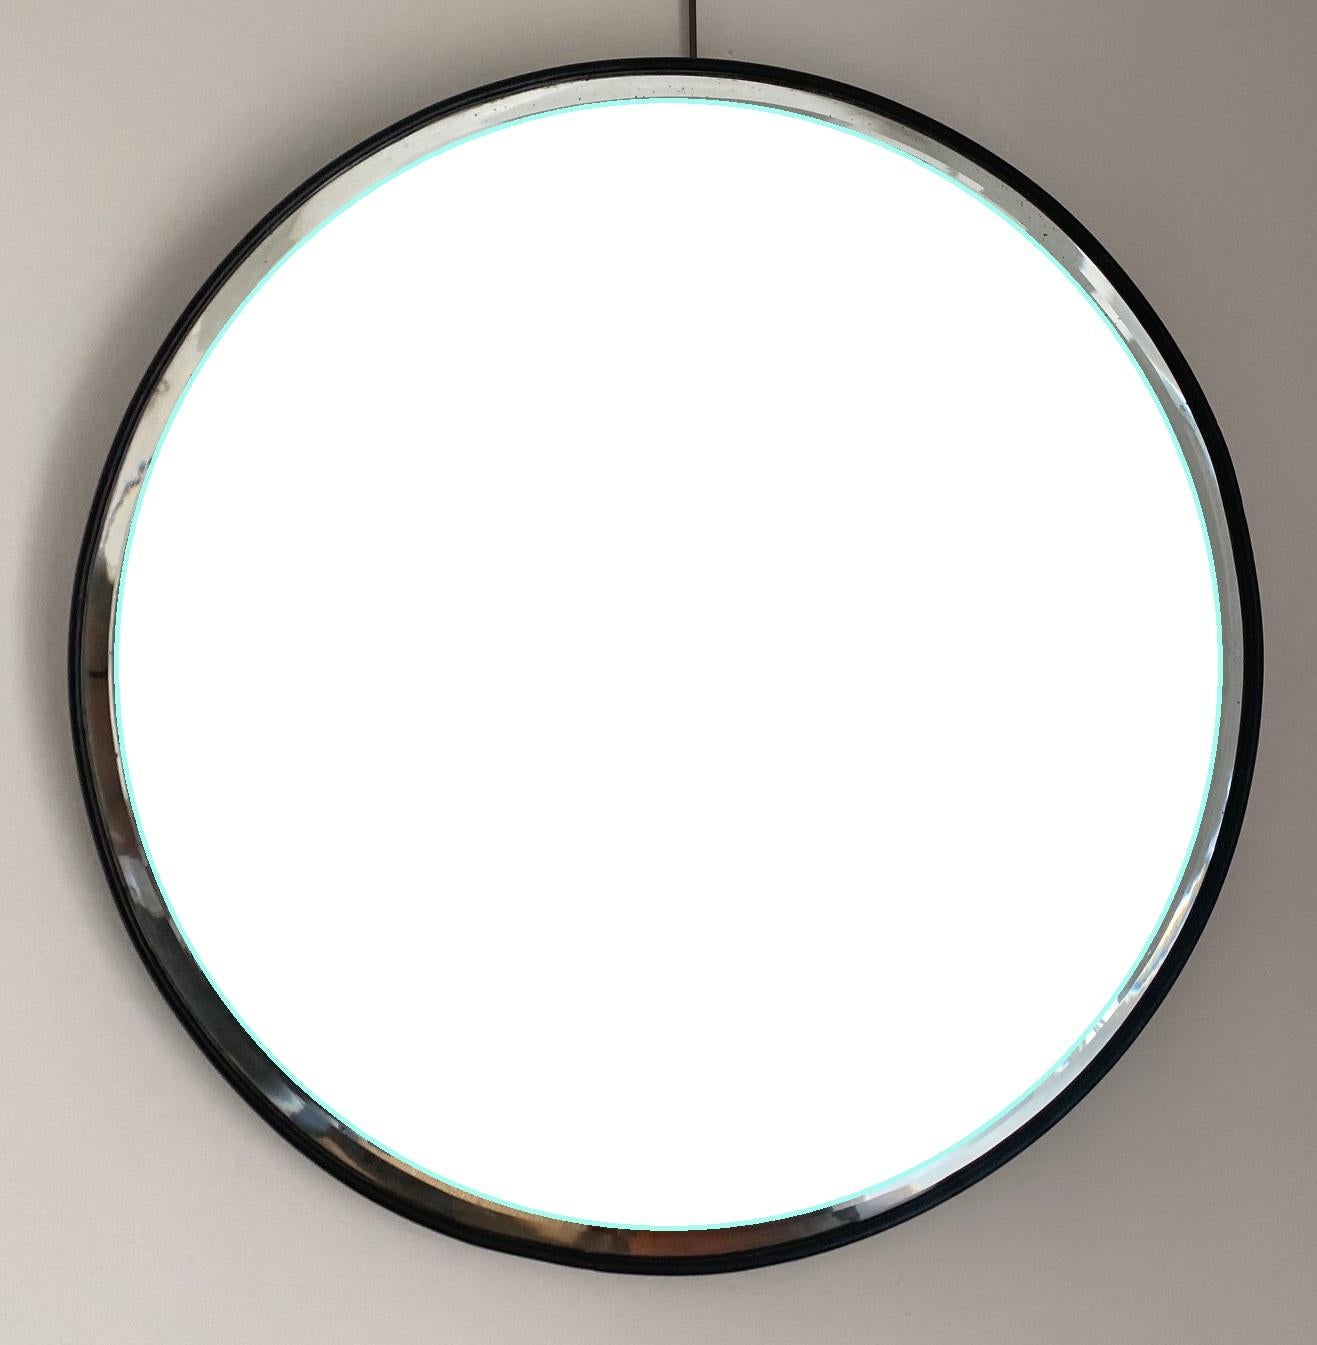 A pair of Art Deco 1930s circular mirrors with fine edged black frames showcasing original beveled glass plates, supported on an octagonal back structure of joined ebonized wood sections.